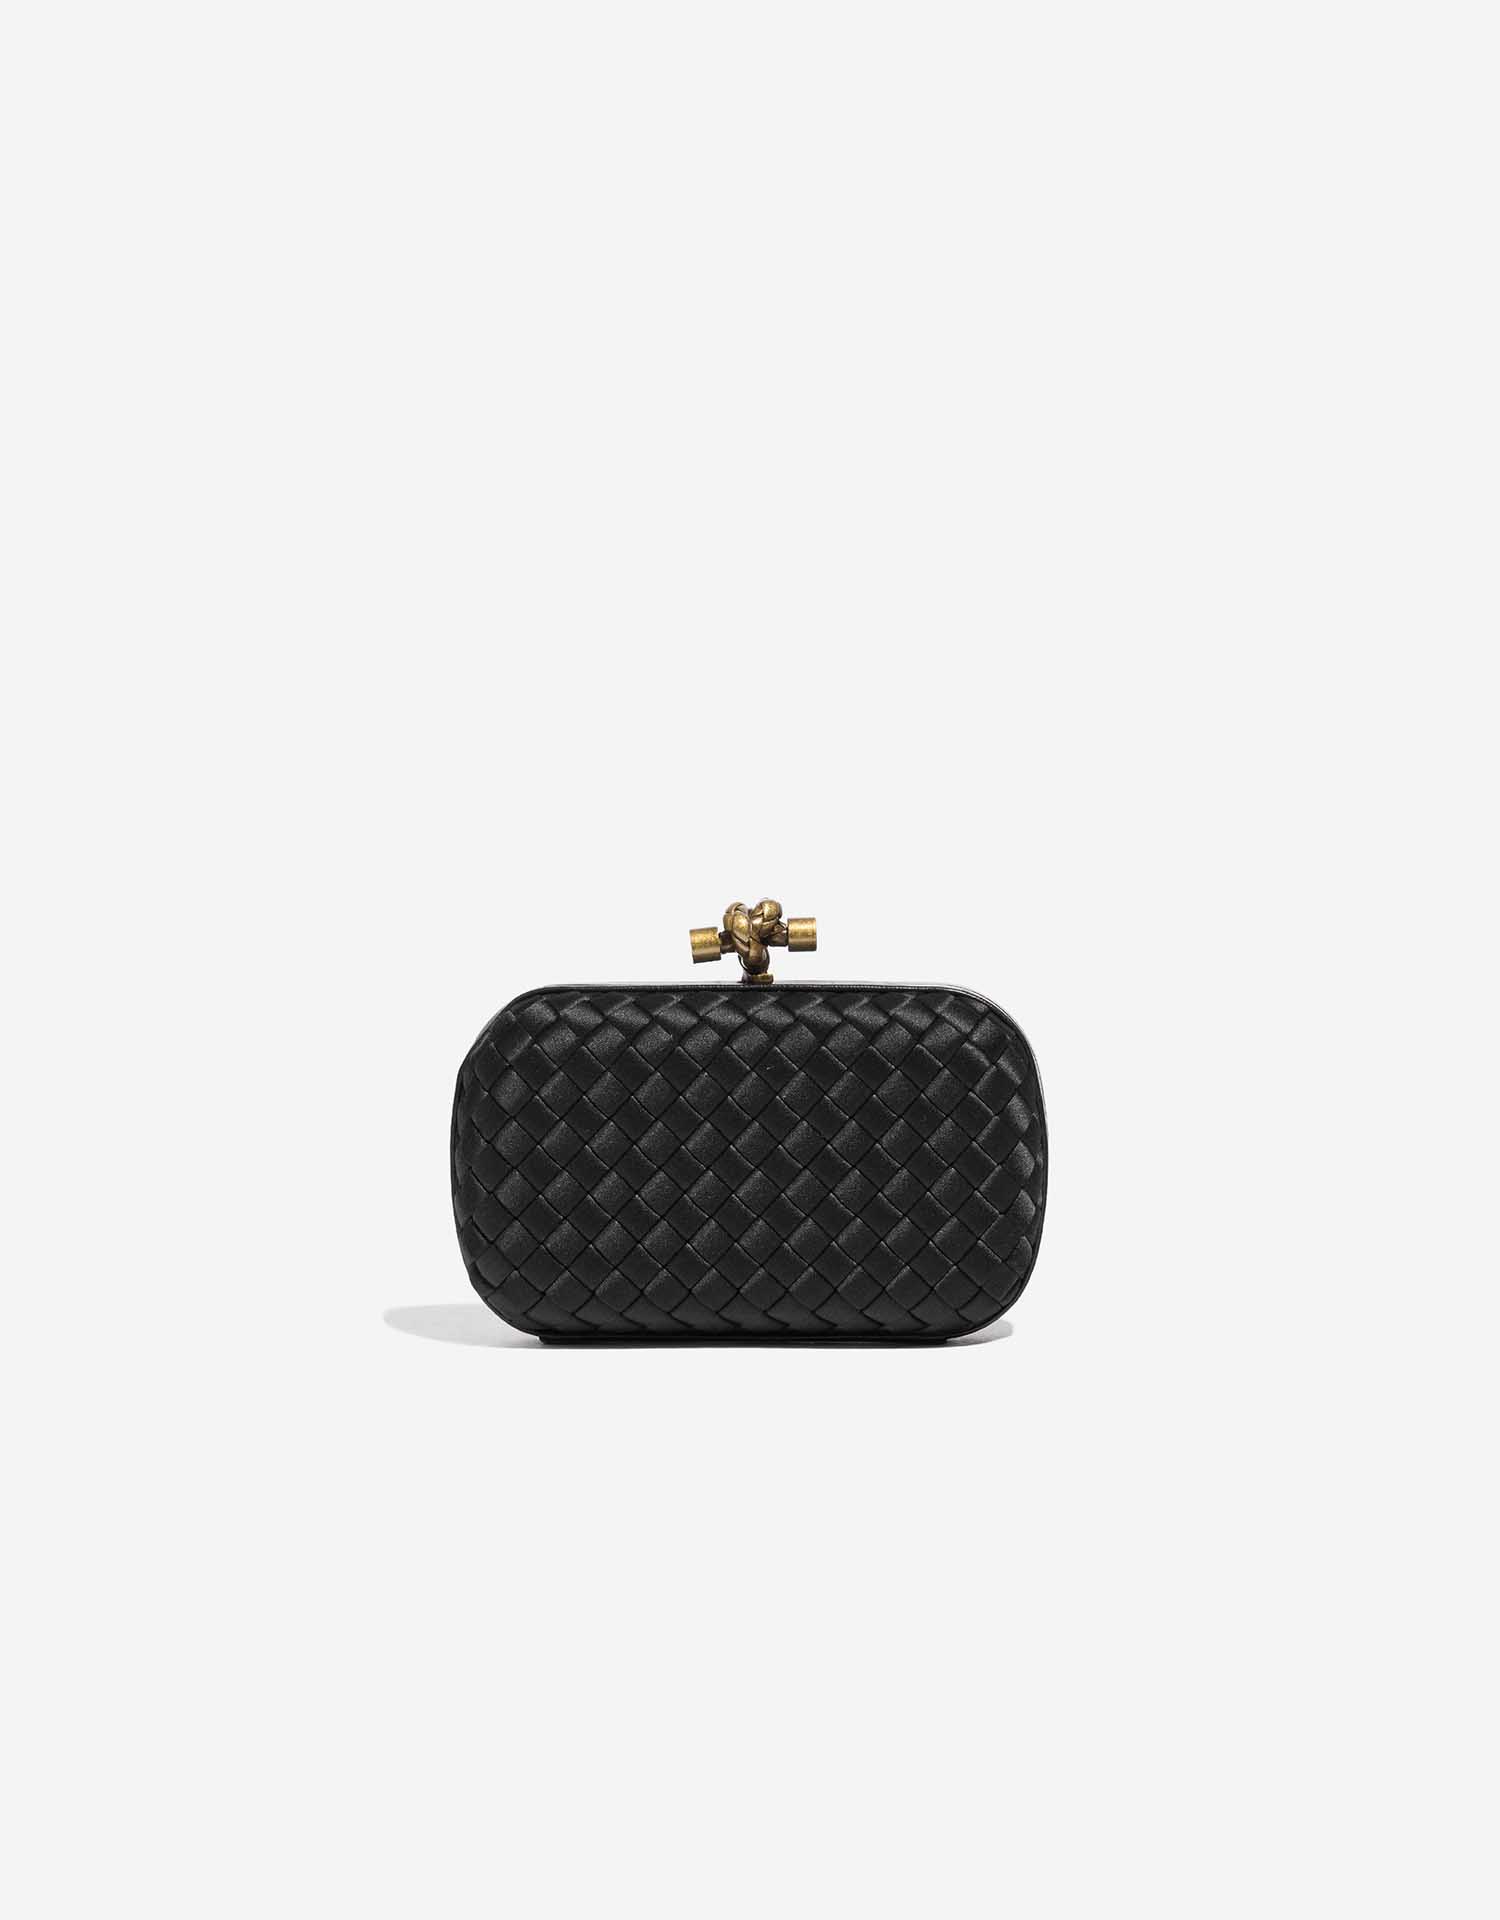 BOTTEGA VENETA, Knot bag, clutch, black braided satin and snake-embossed  leather, rigid model with top fastening in the form of a knot. inside  marked BOTTEGA VENETA MADE IN ITALY. Vintage Clothing 